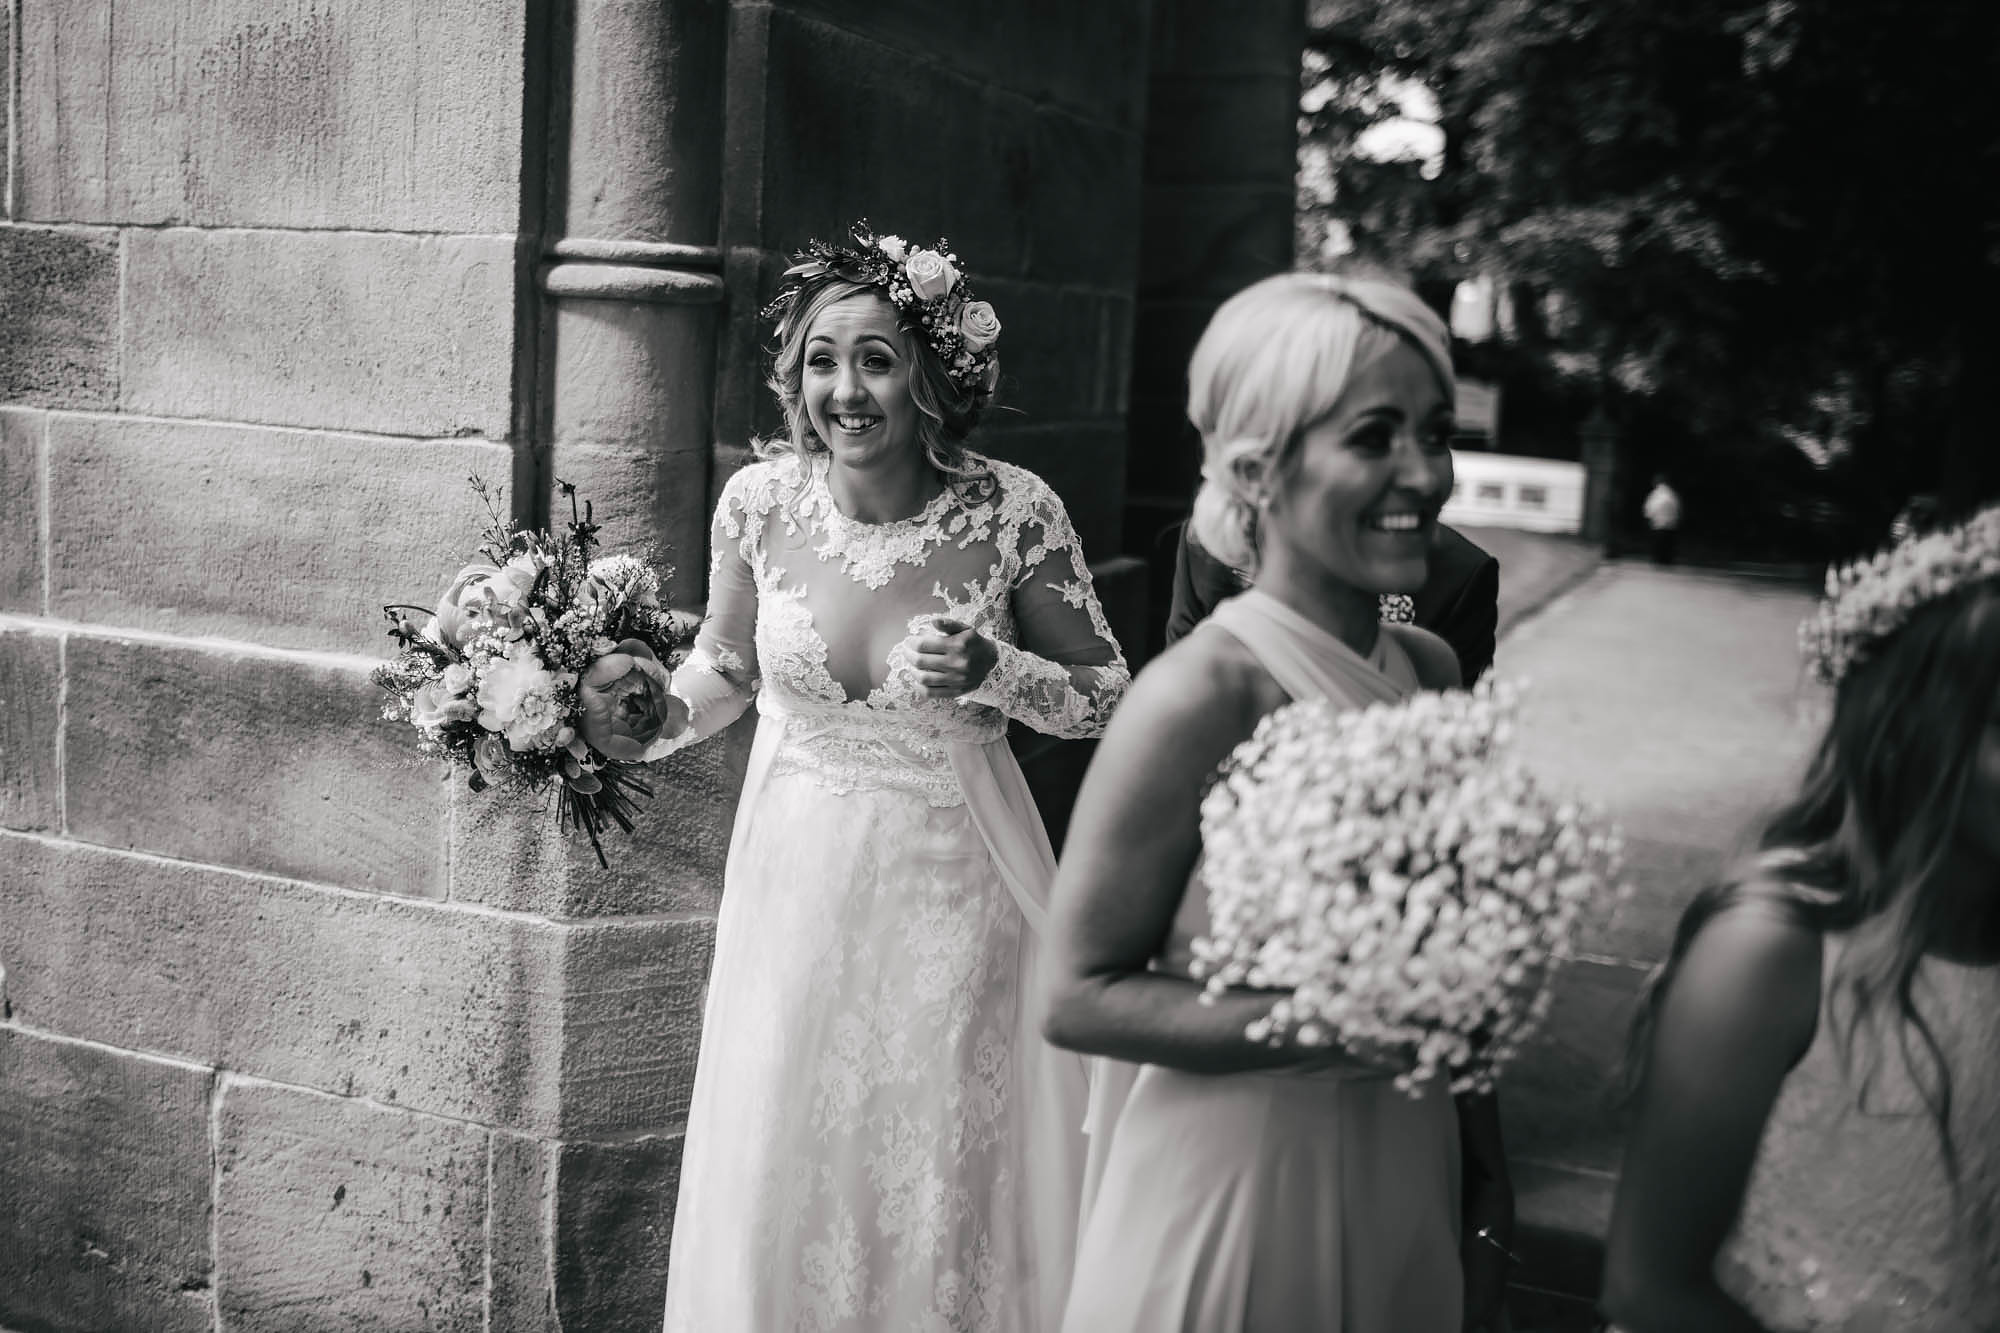 Bride laughing outside the church on her wedding day